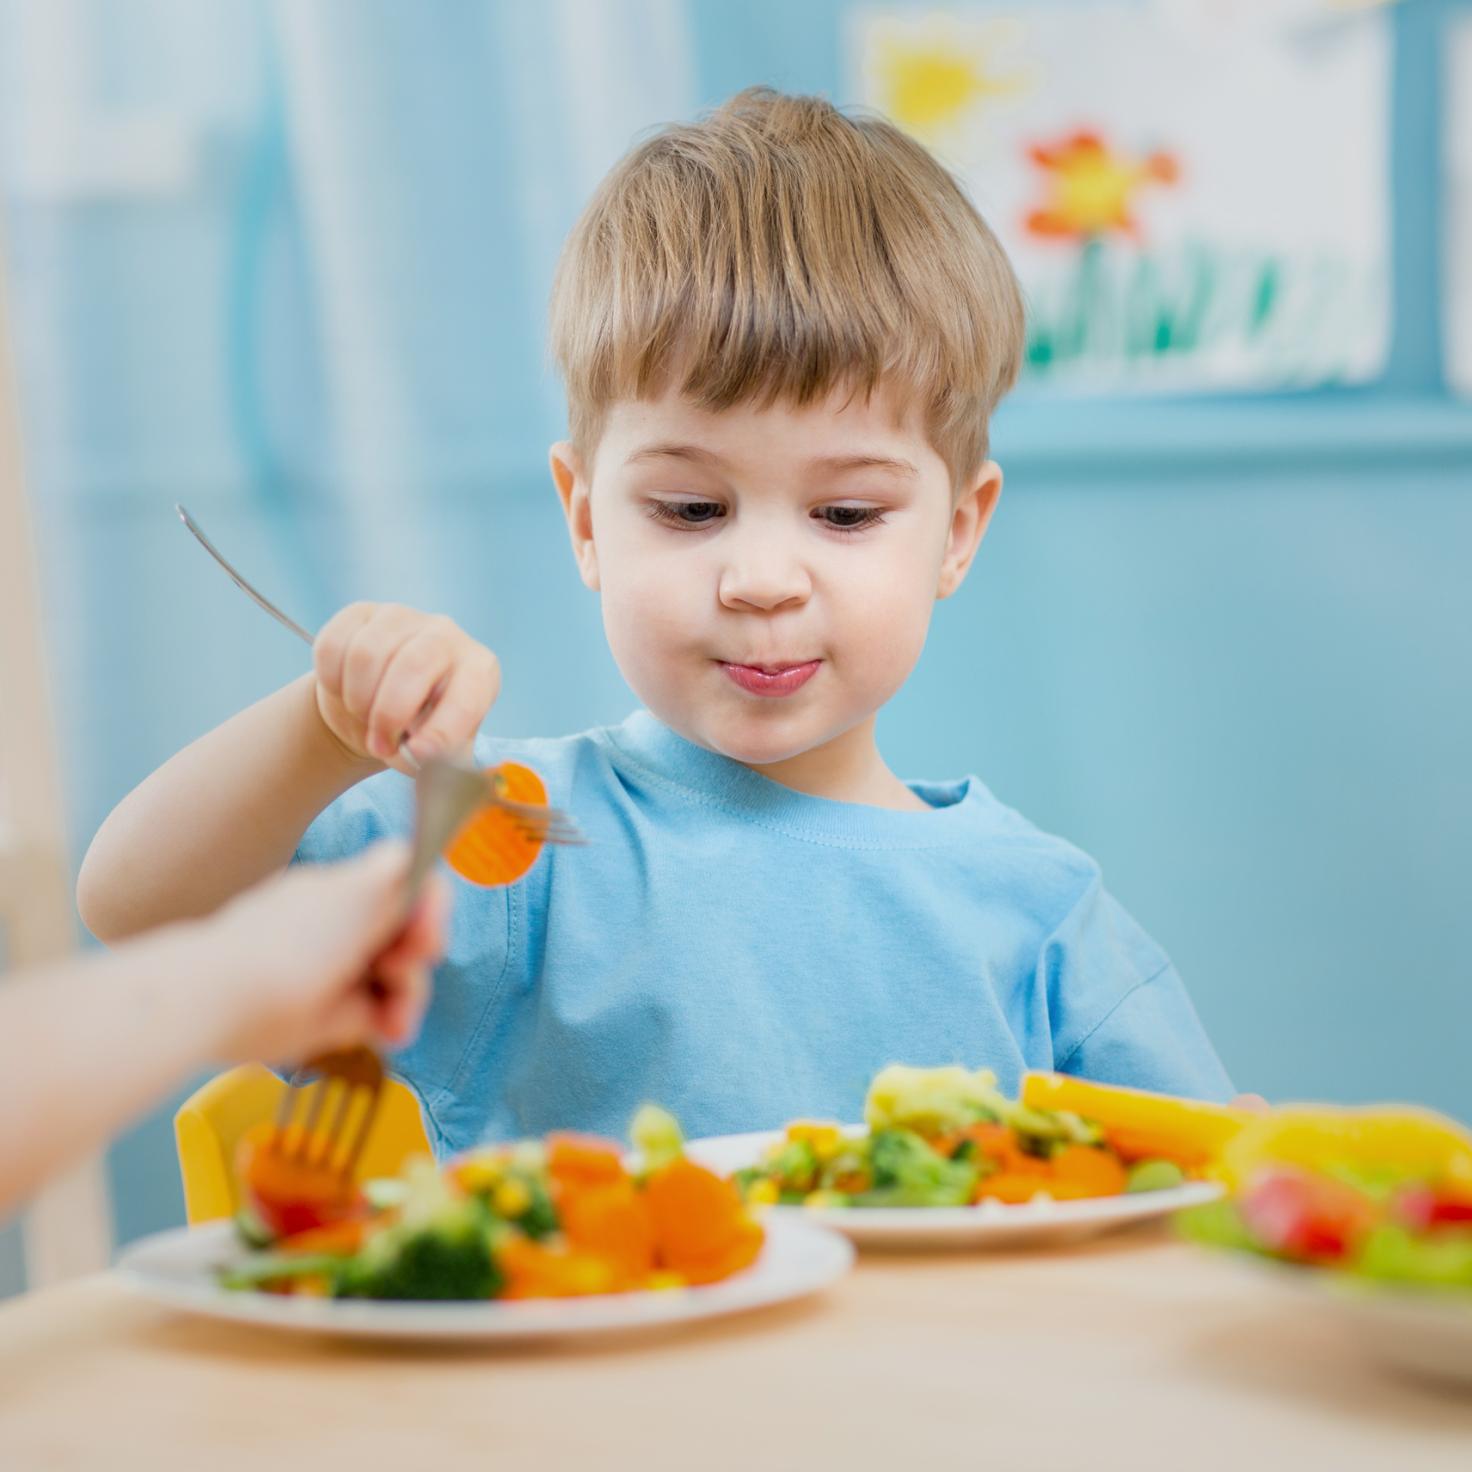 What Are Some Creative Ways To Make Healthy Eating Fun For Kids?